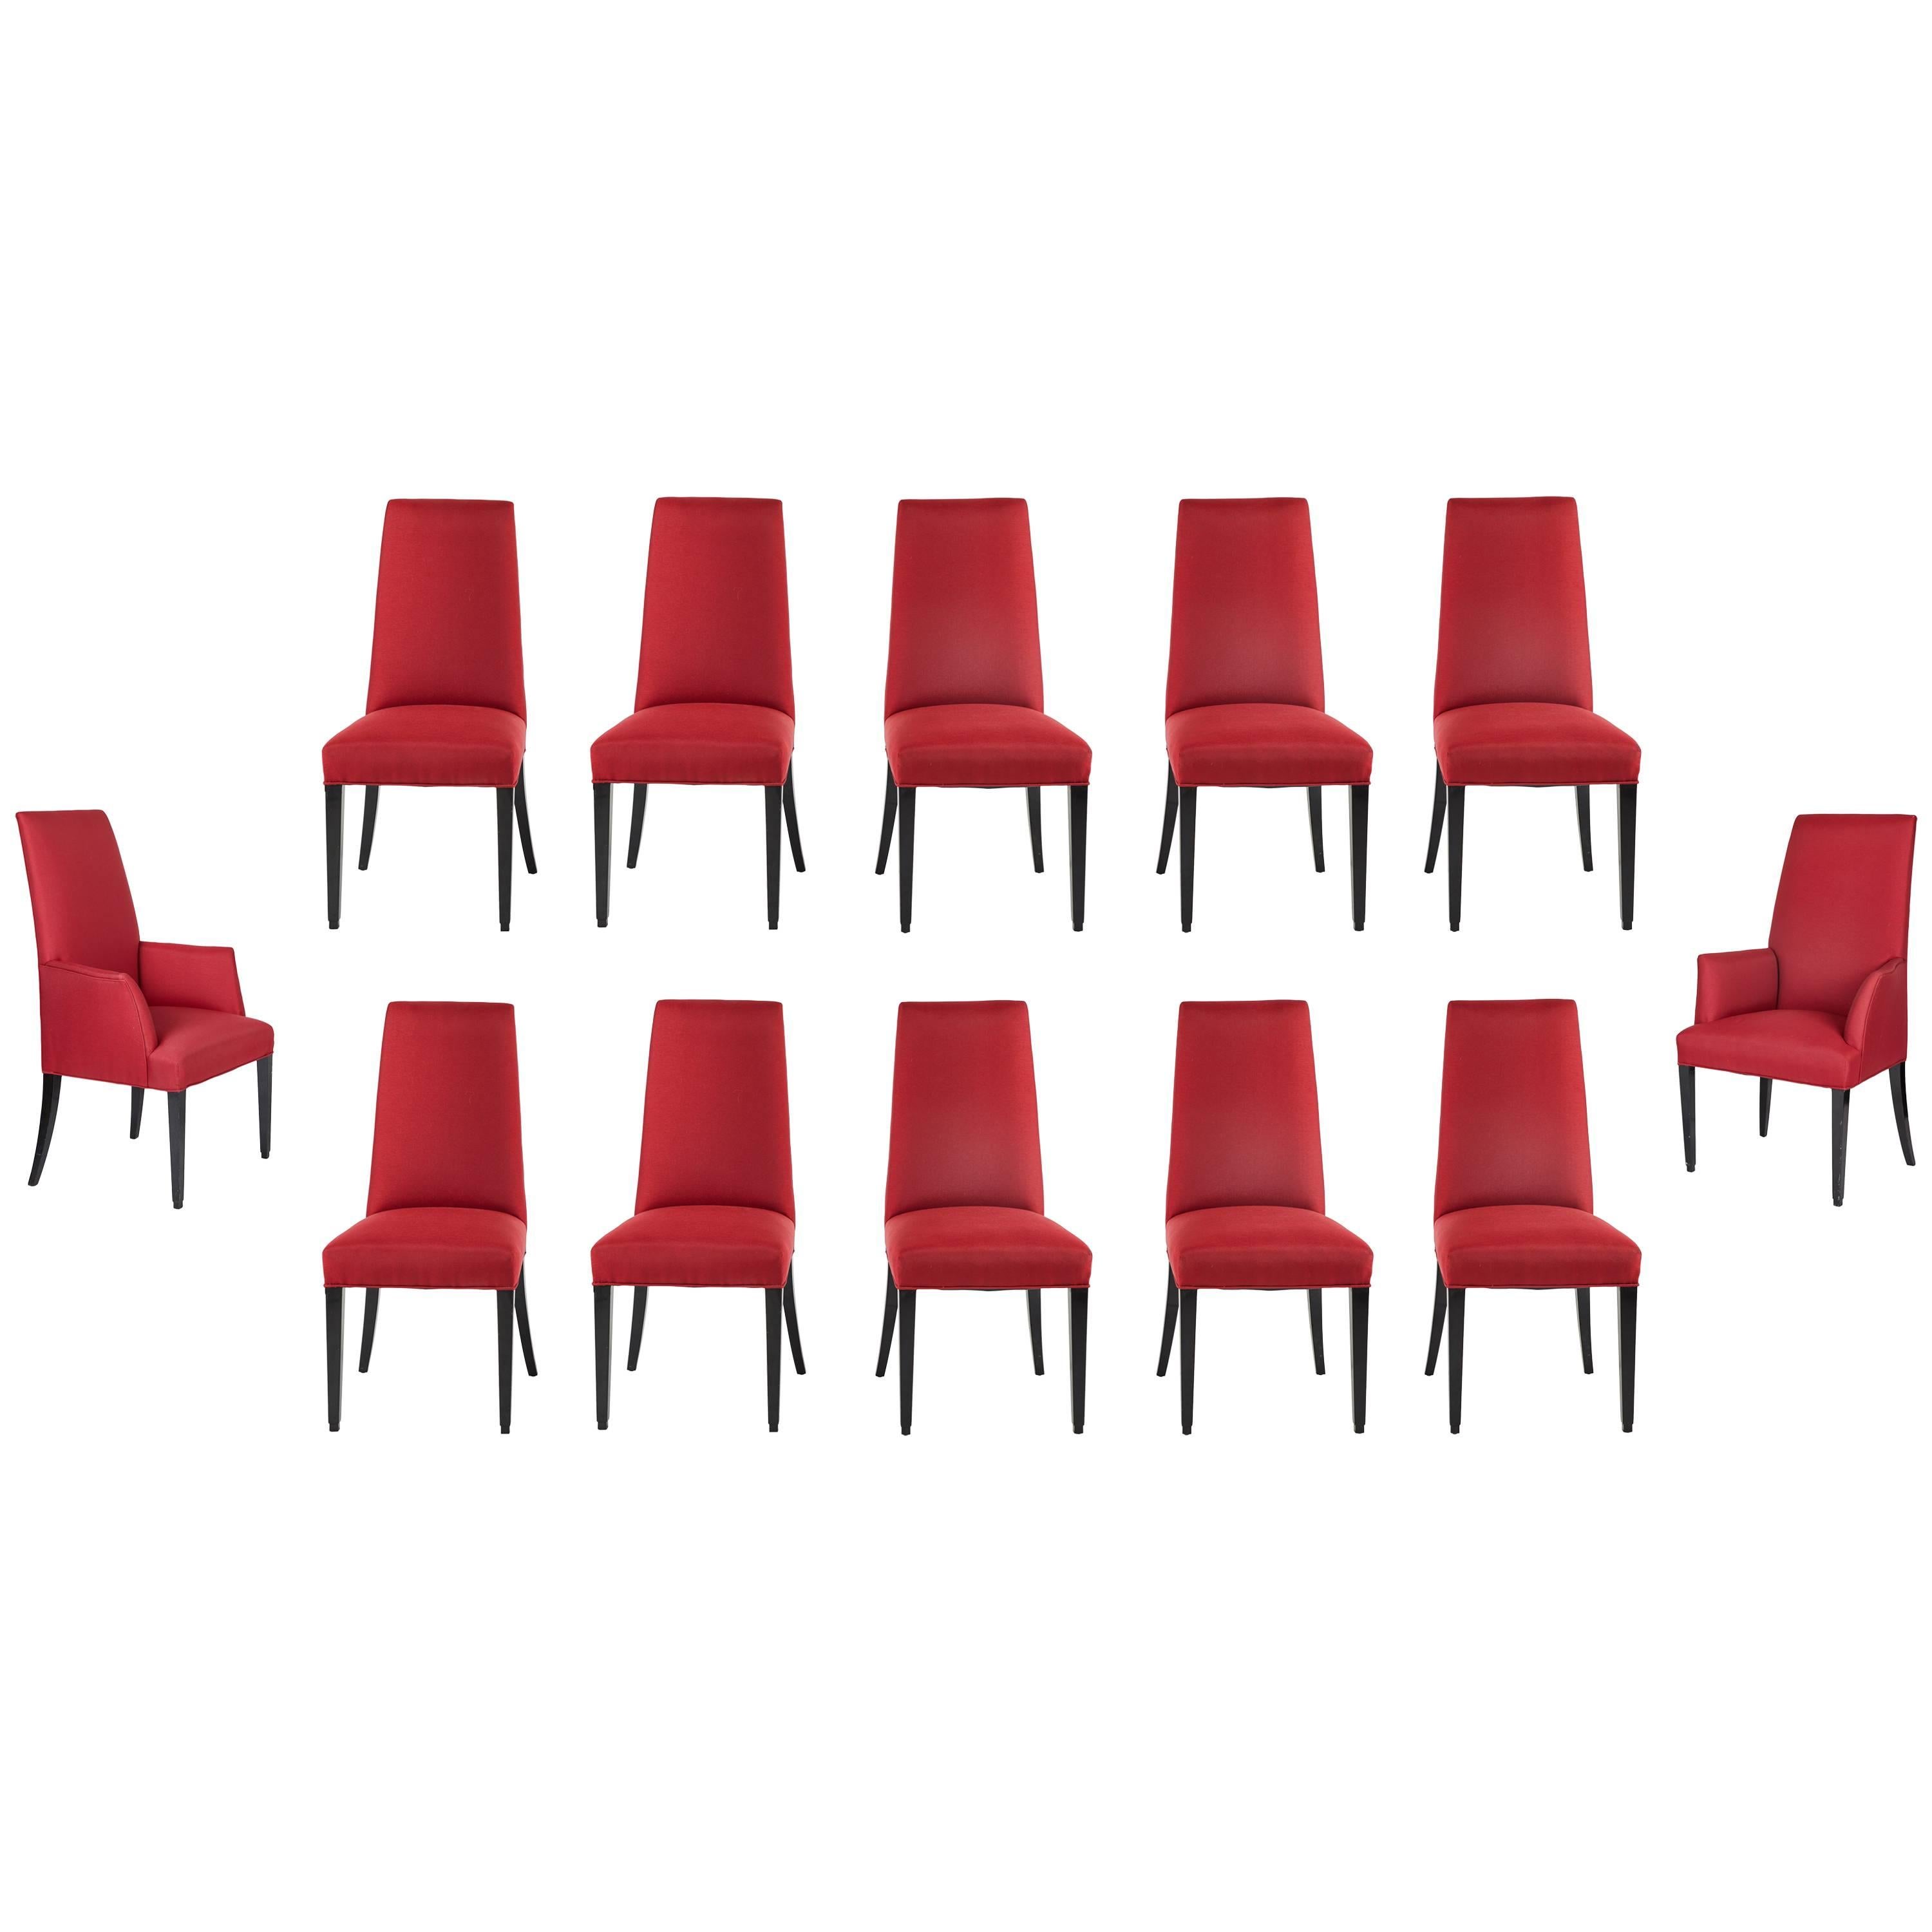 Set of 12 Red Dining Chairs